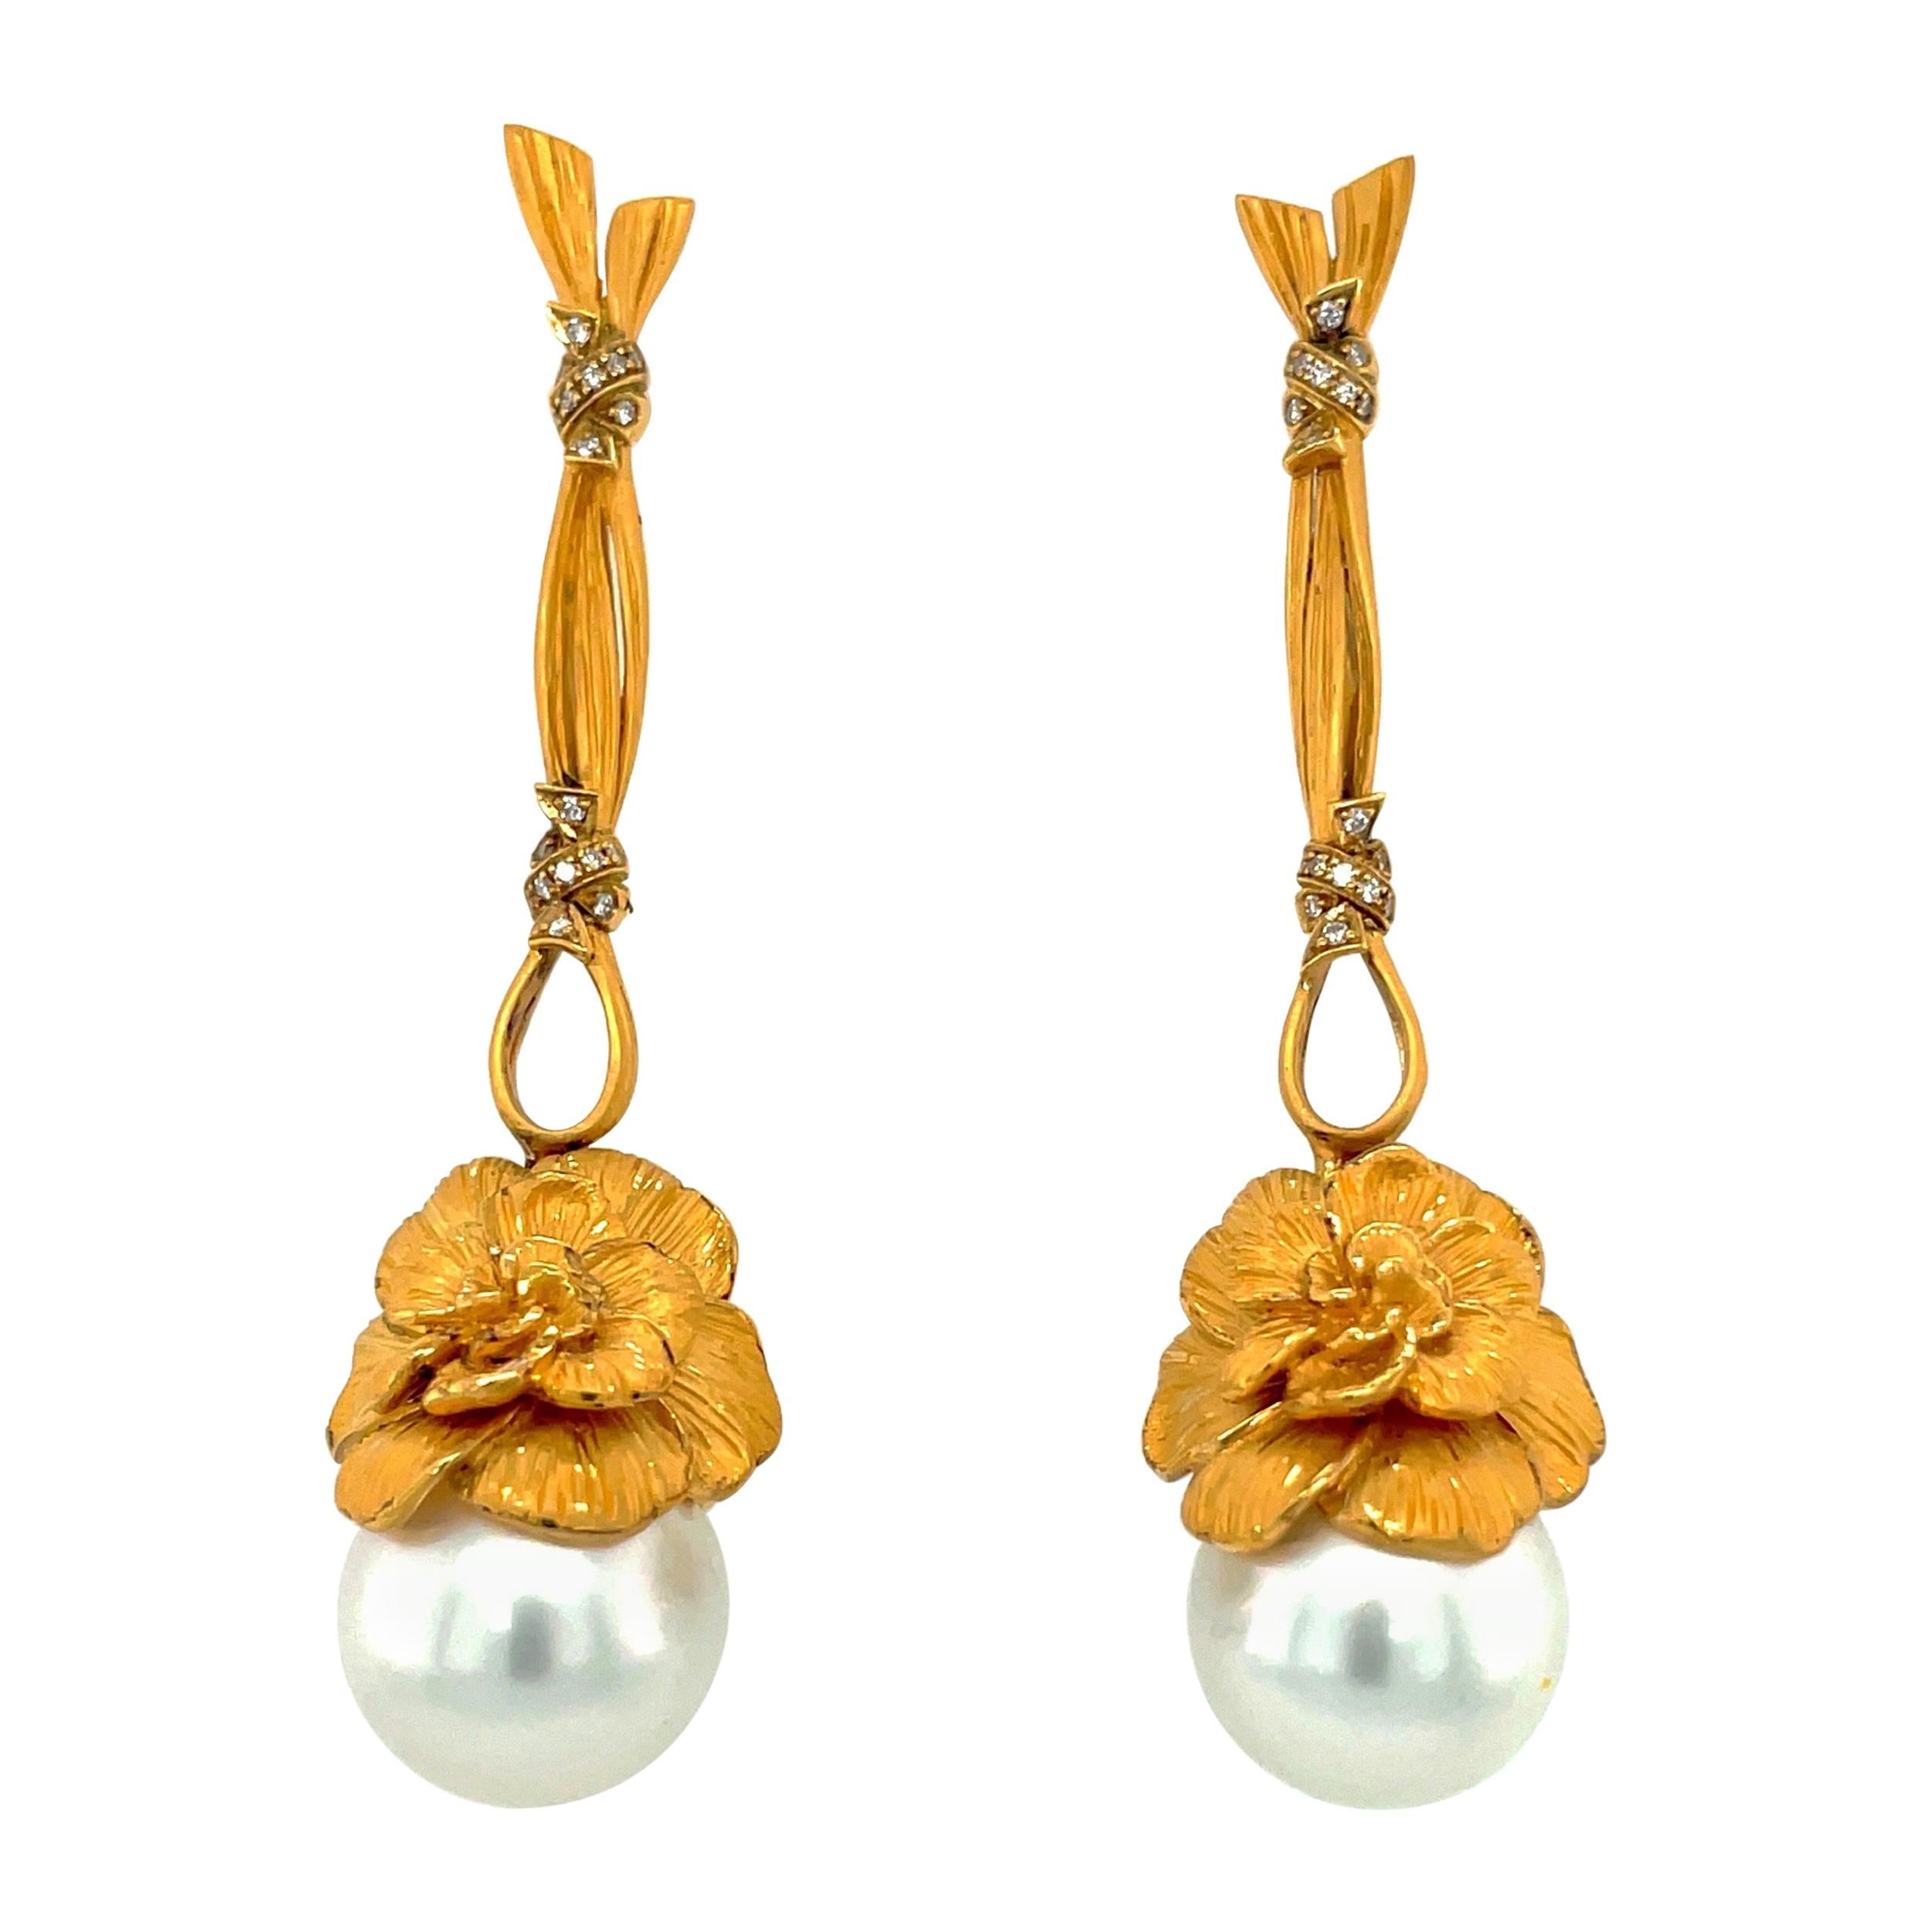 Carrera y Carrera 18kt Yellow Gold Gardenia Earrings with South Sea Pearls